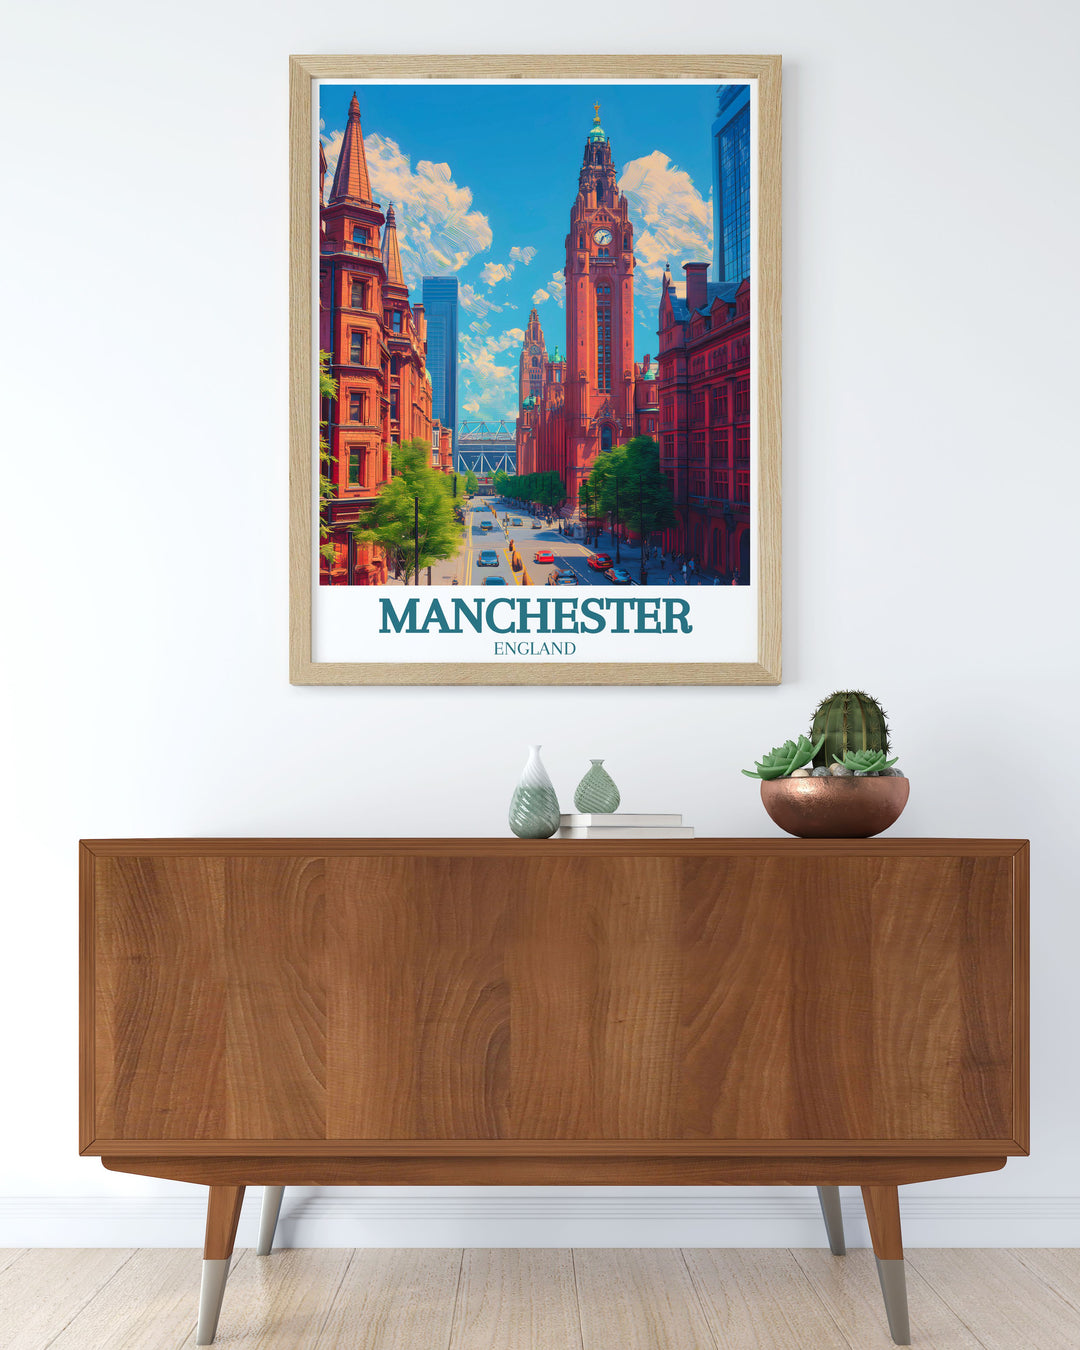 Manchester town hall poster featuring the citys famous landmark along with other notable sites like Printworks and Hacienda perfect for travel enthusiasts and art collectors.